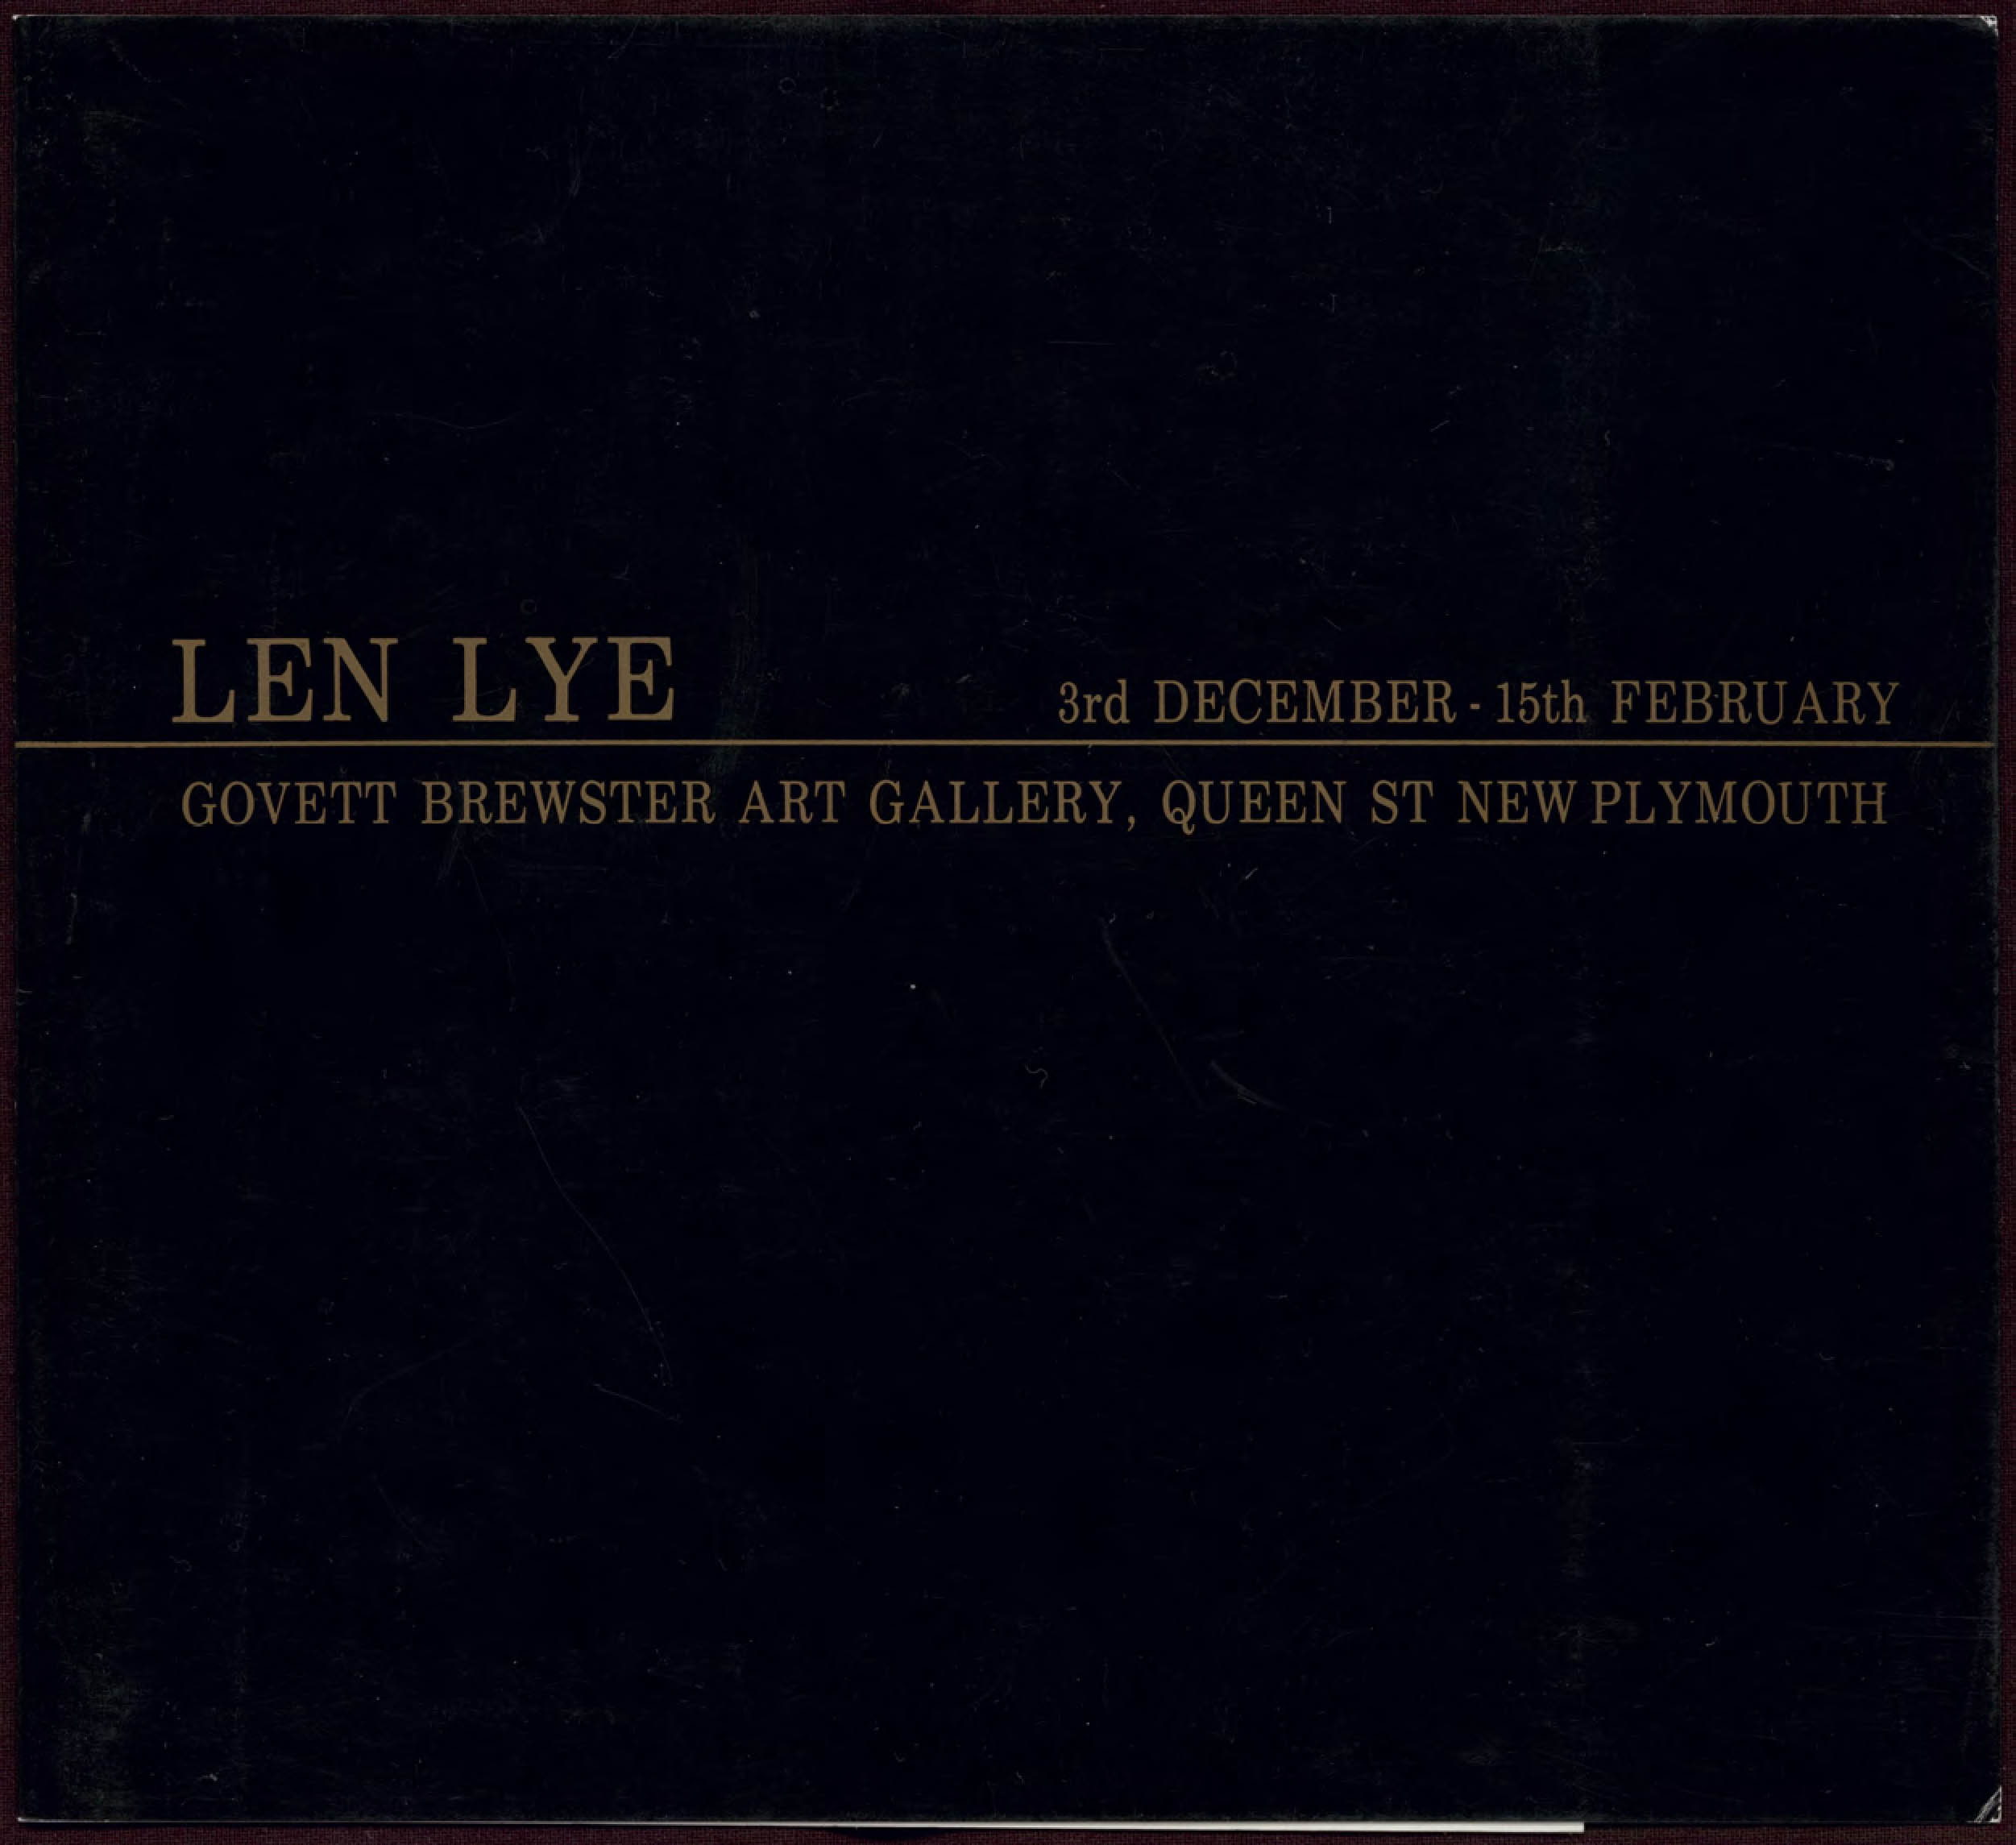 Cover image of catalogue to the 1980 exhibition of Len Lye's work at the Govett-Brewster Art Gallery, featuring a black background and gold text with Len Lye in large letters, date, and gallery naming.